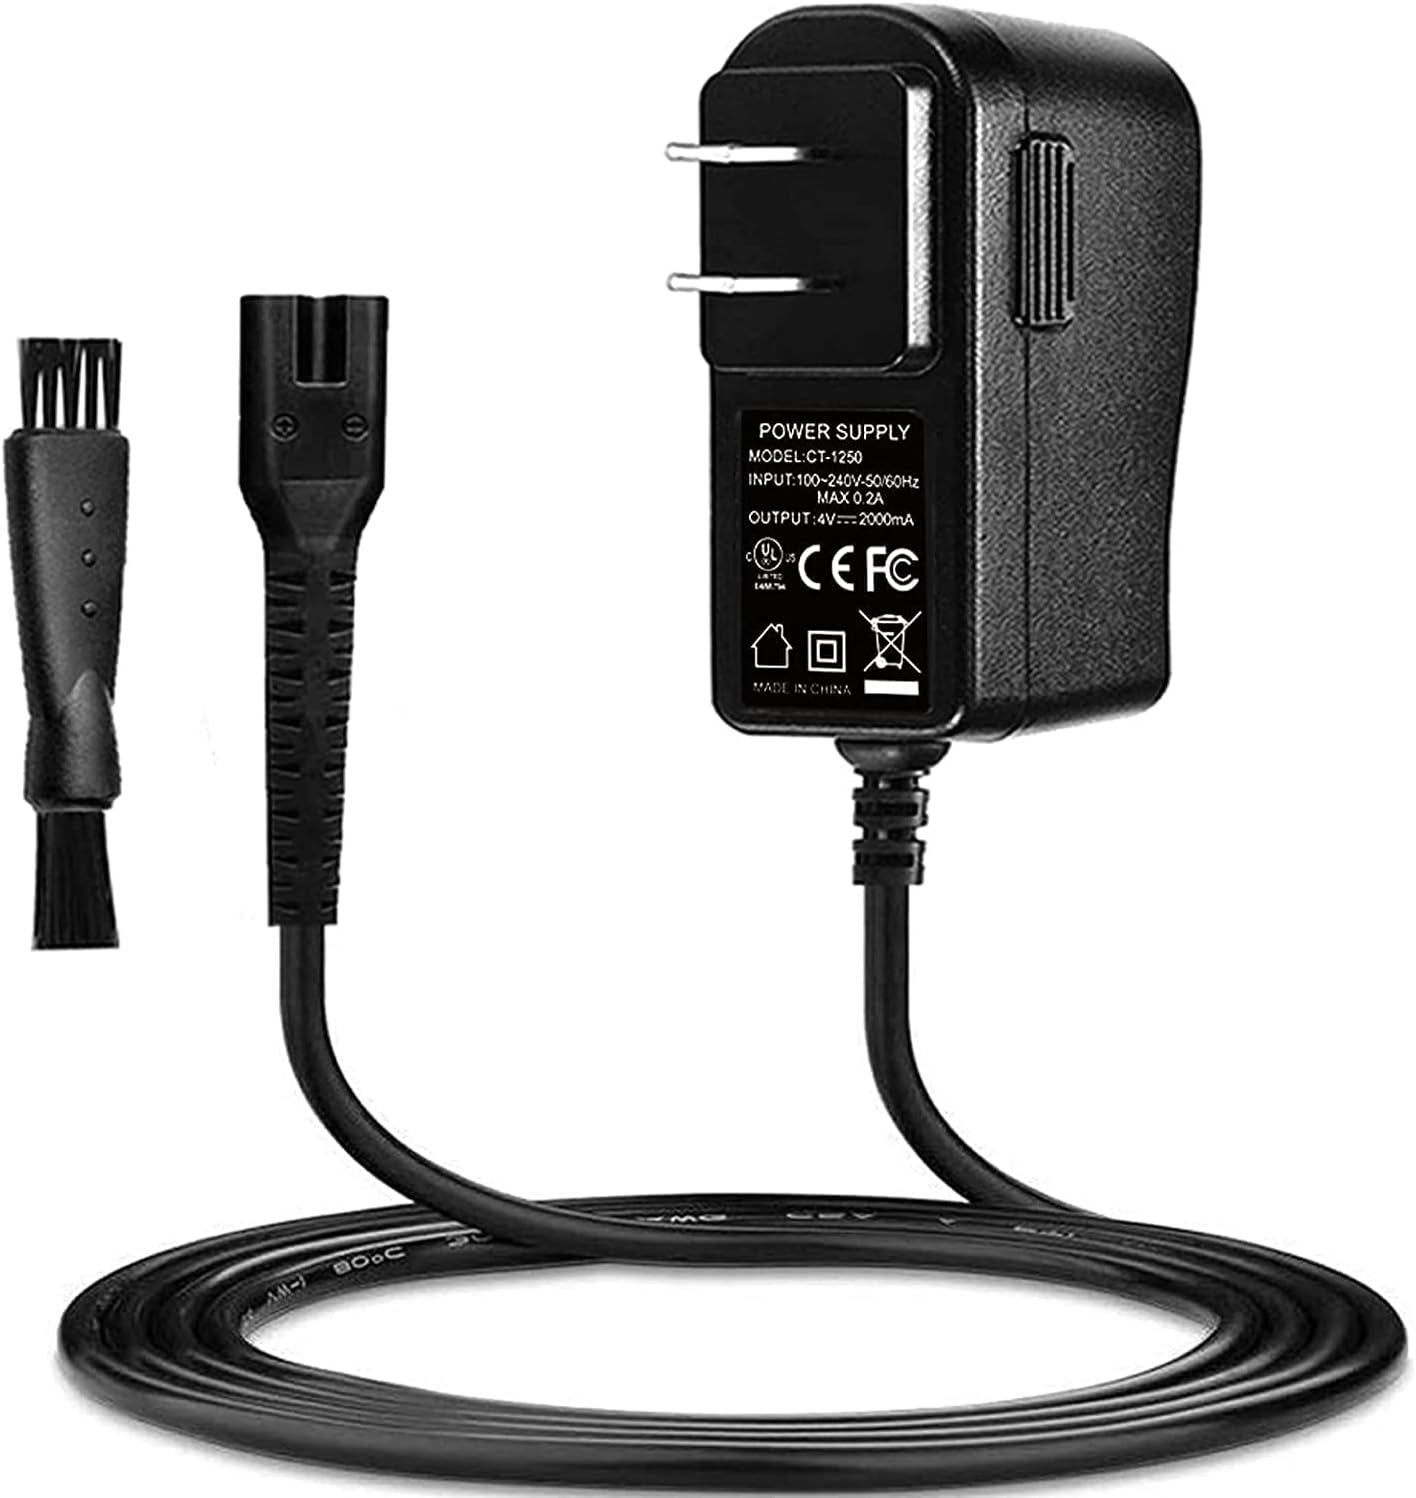 Replacement for Wahl Magic Clipper Cordless Charger, 4V Clipper Charger Compatible with Wahl 8164/8591/8148/8504, 5-Star